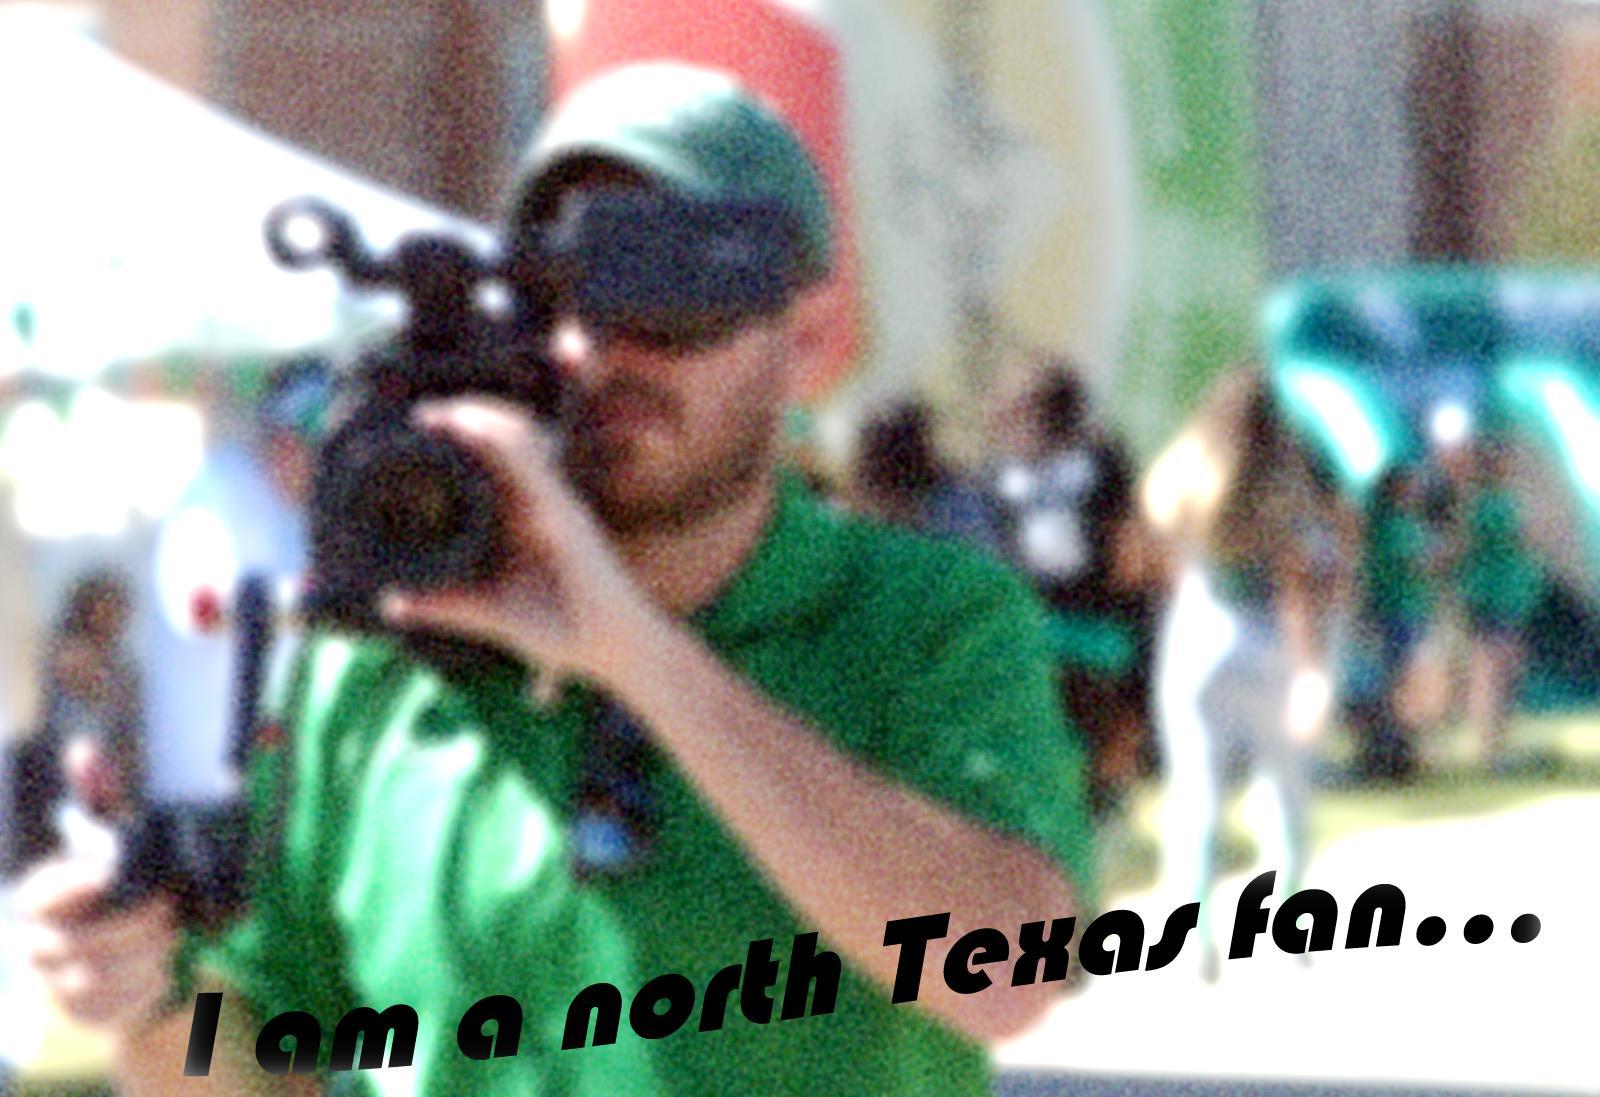 More information about "I am a north Texas fan... episode 1"